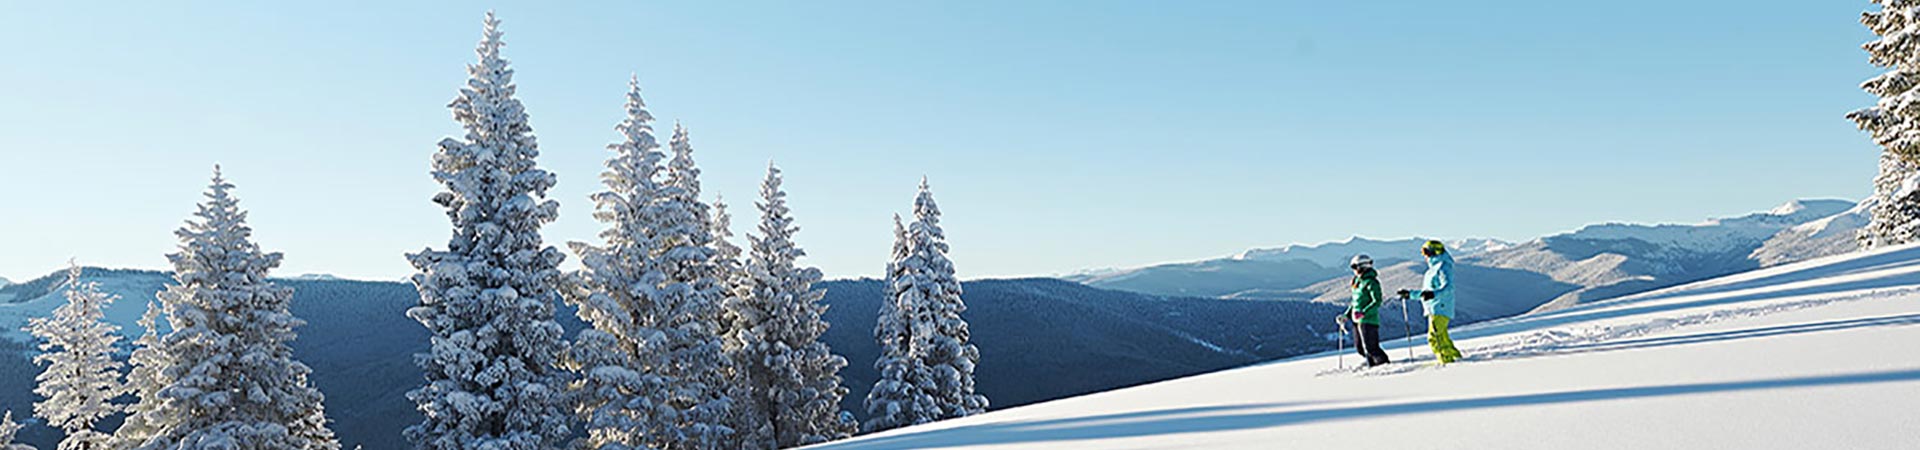 Two skiers in bowl with snowy trees and blue sky 1920x400